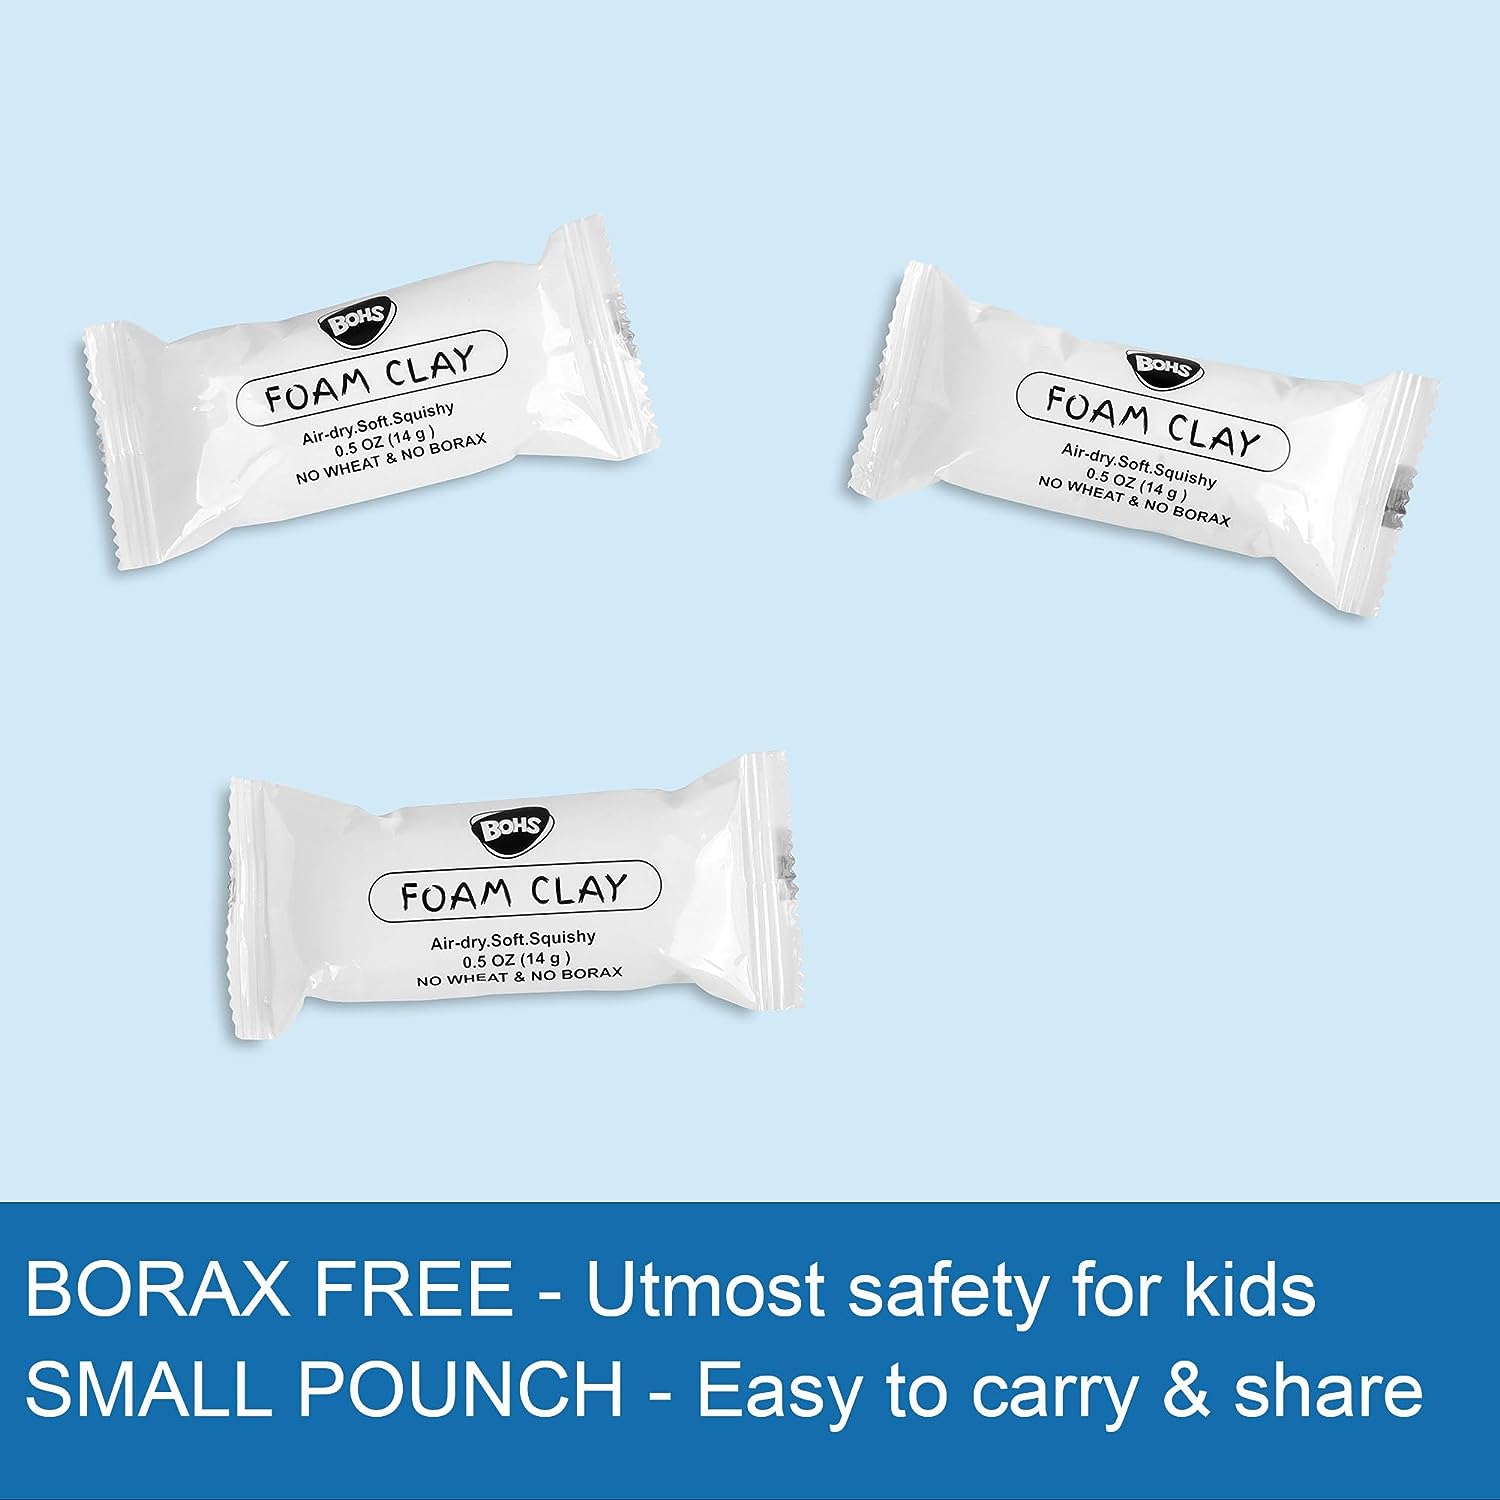 BOHS Foam Clay - Borax Free for Children Care - 30 Count